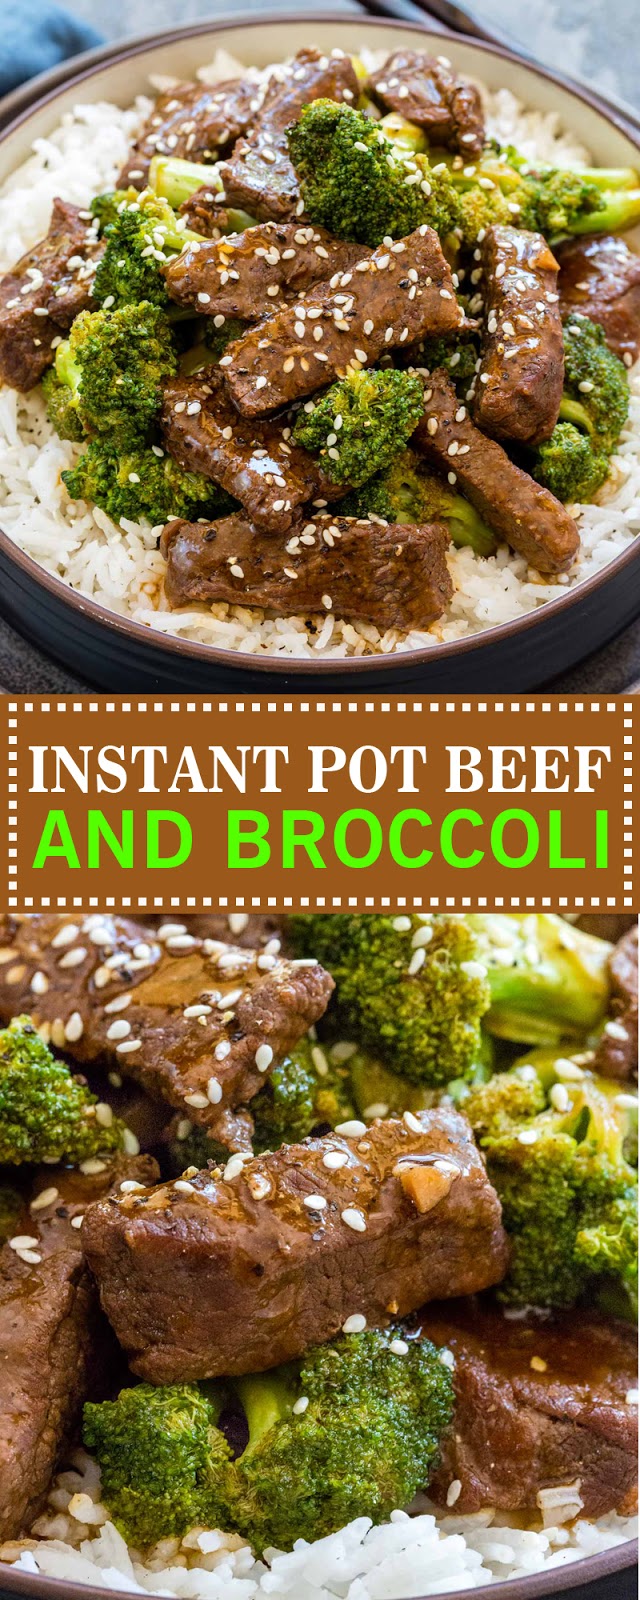 INSTANT POT BEEF AND BROCCOLI